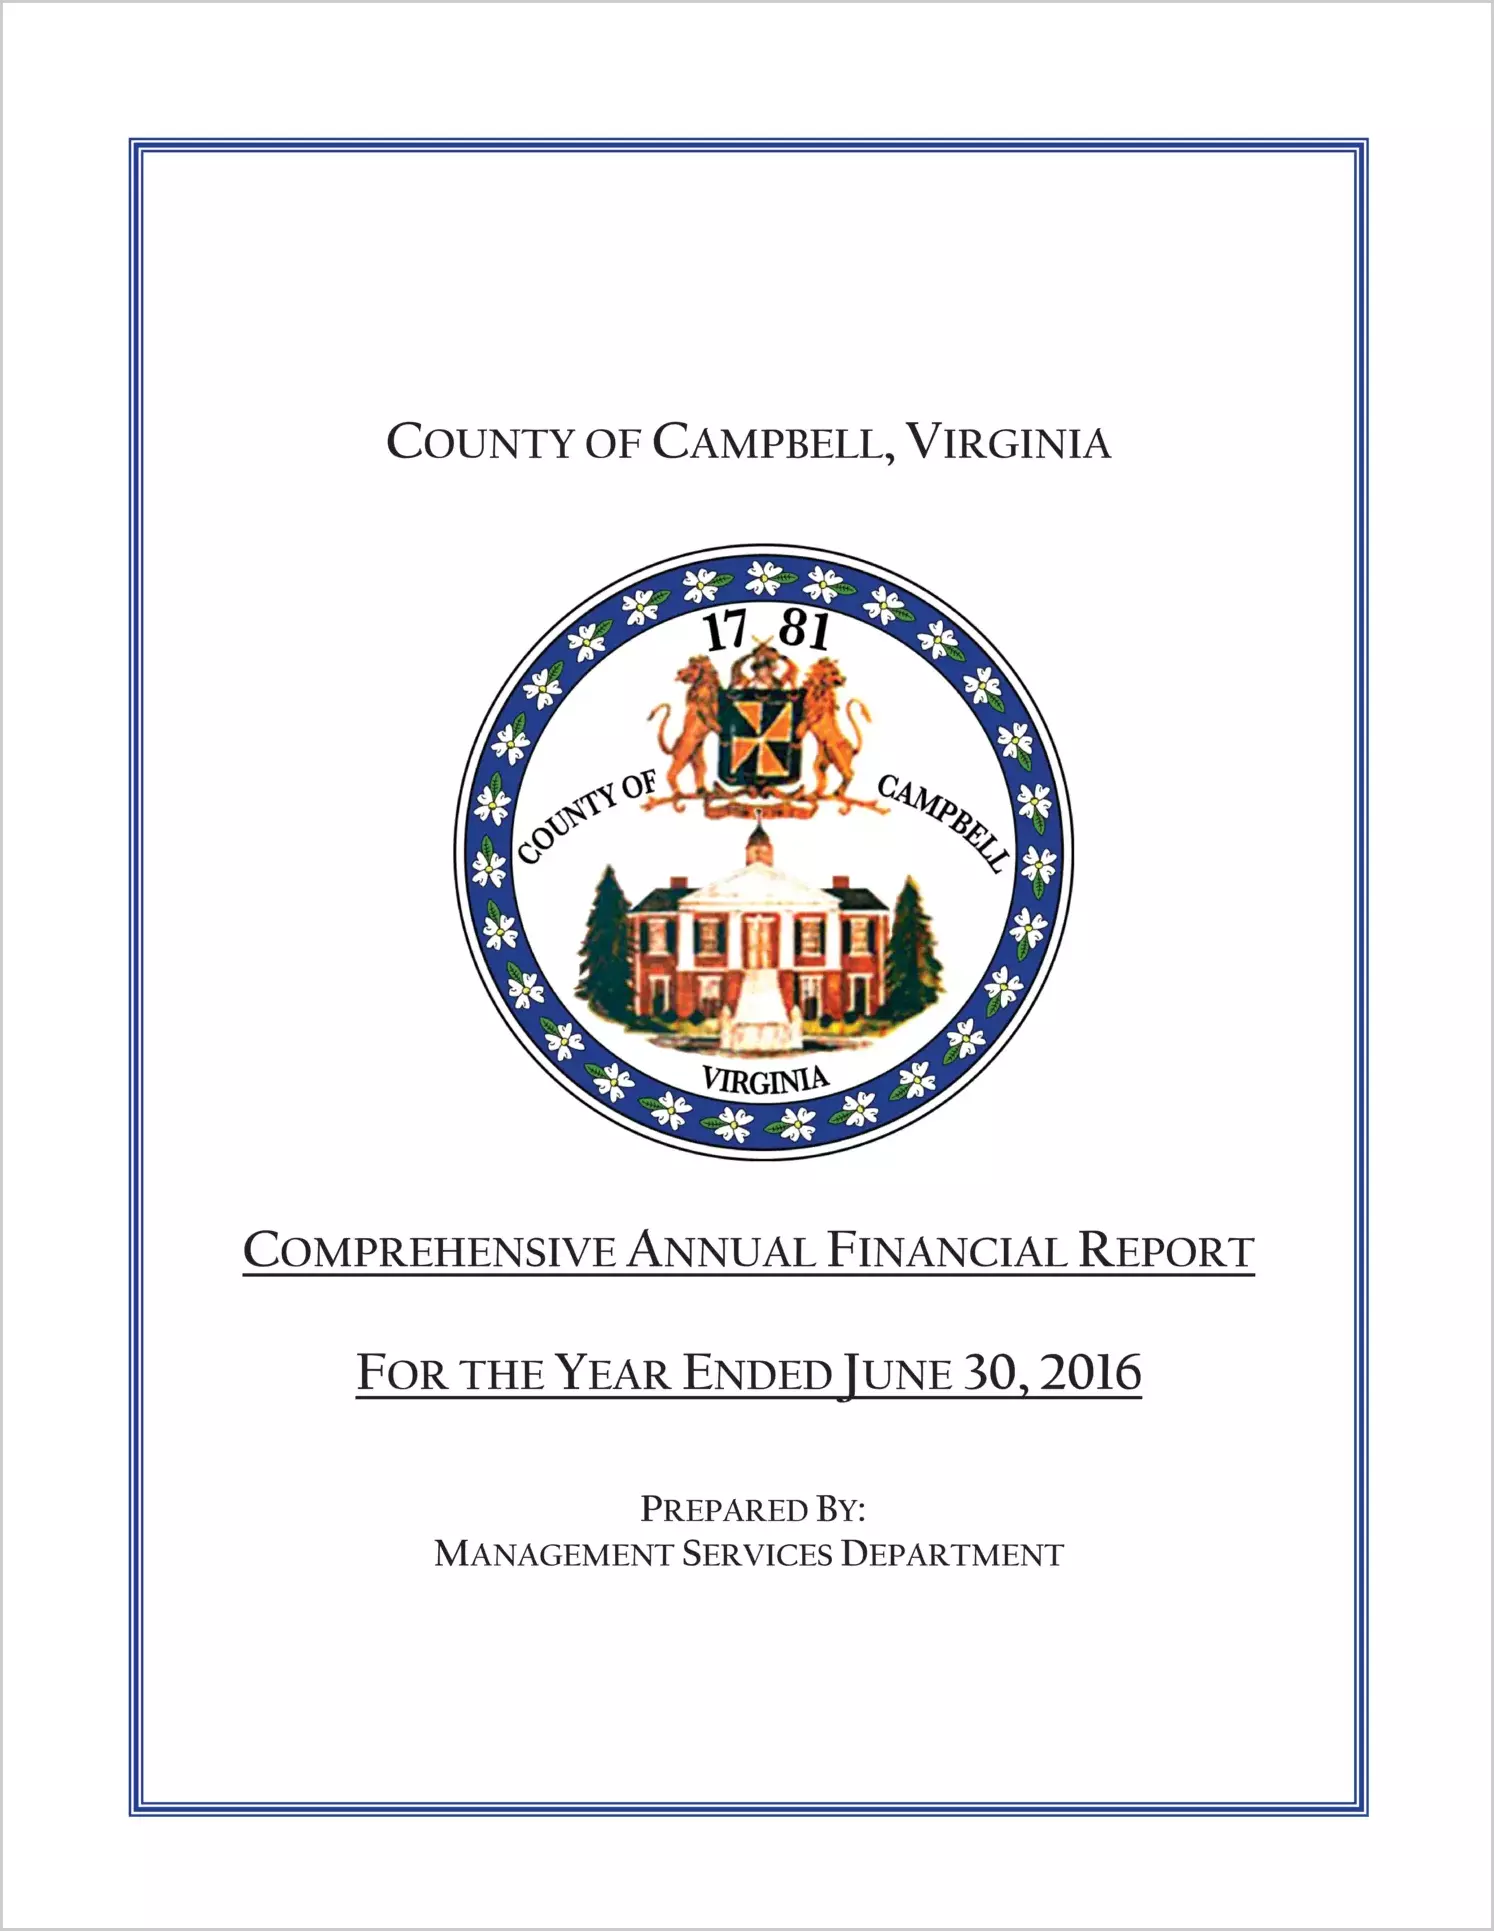 2016 Annual Financial Report for County of Campbell